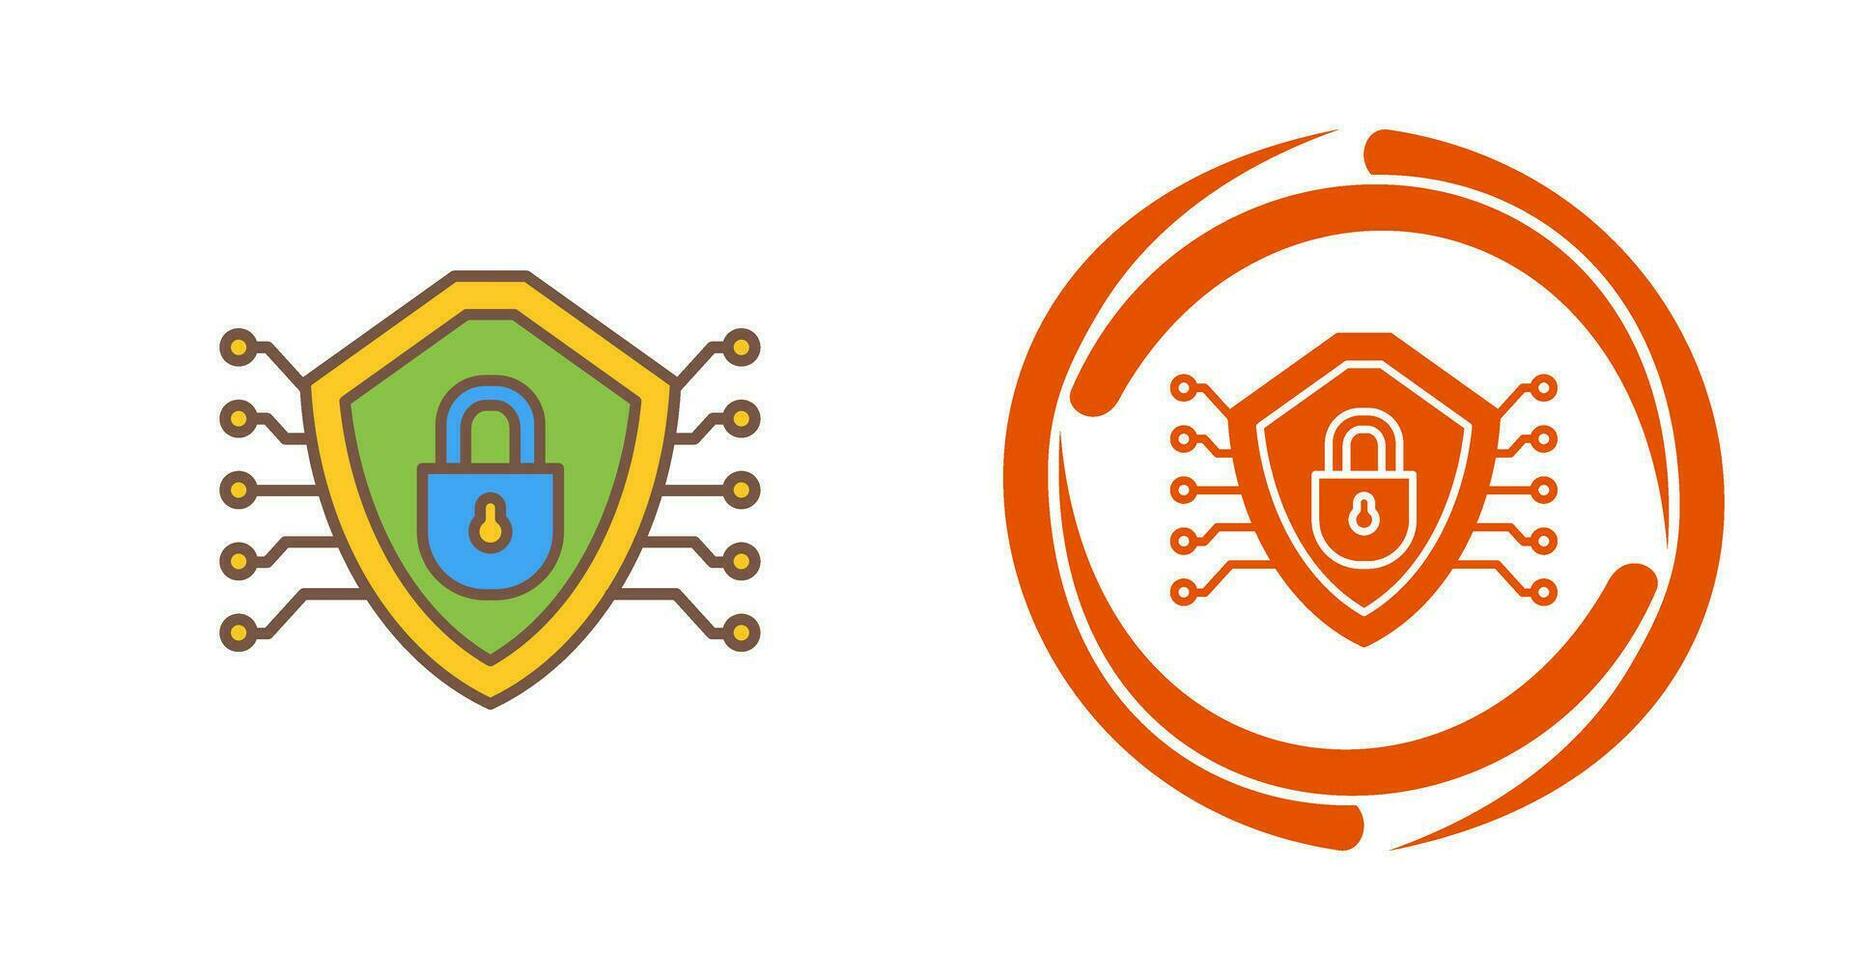 Cyber Security Vector Icon